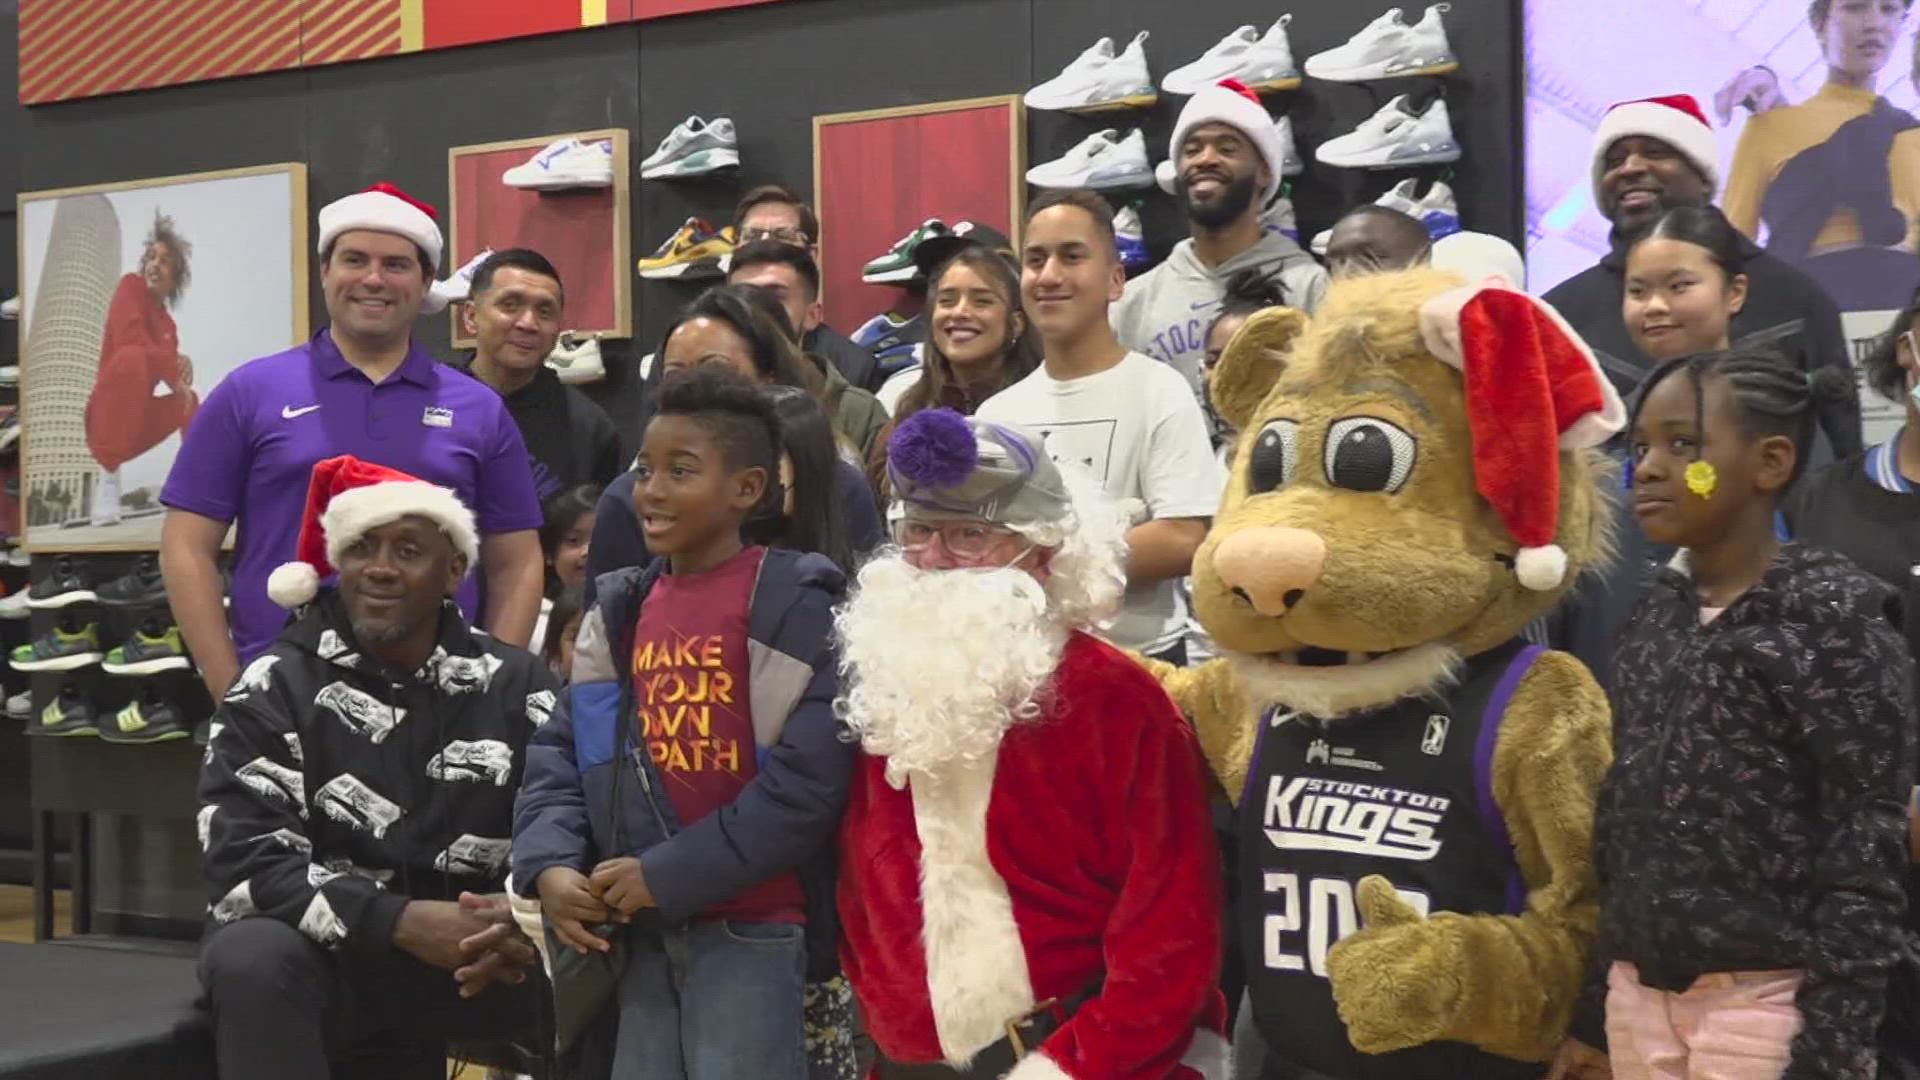 Jackson participates in an annual giveaway around this time every year, saying he has spent more time in Stockton than his home state of North Carolina.